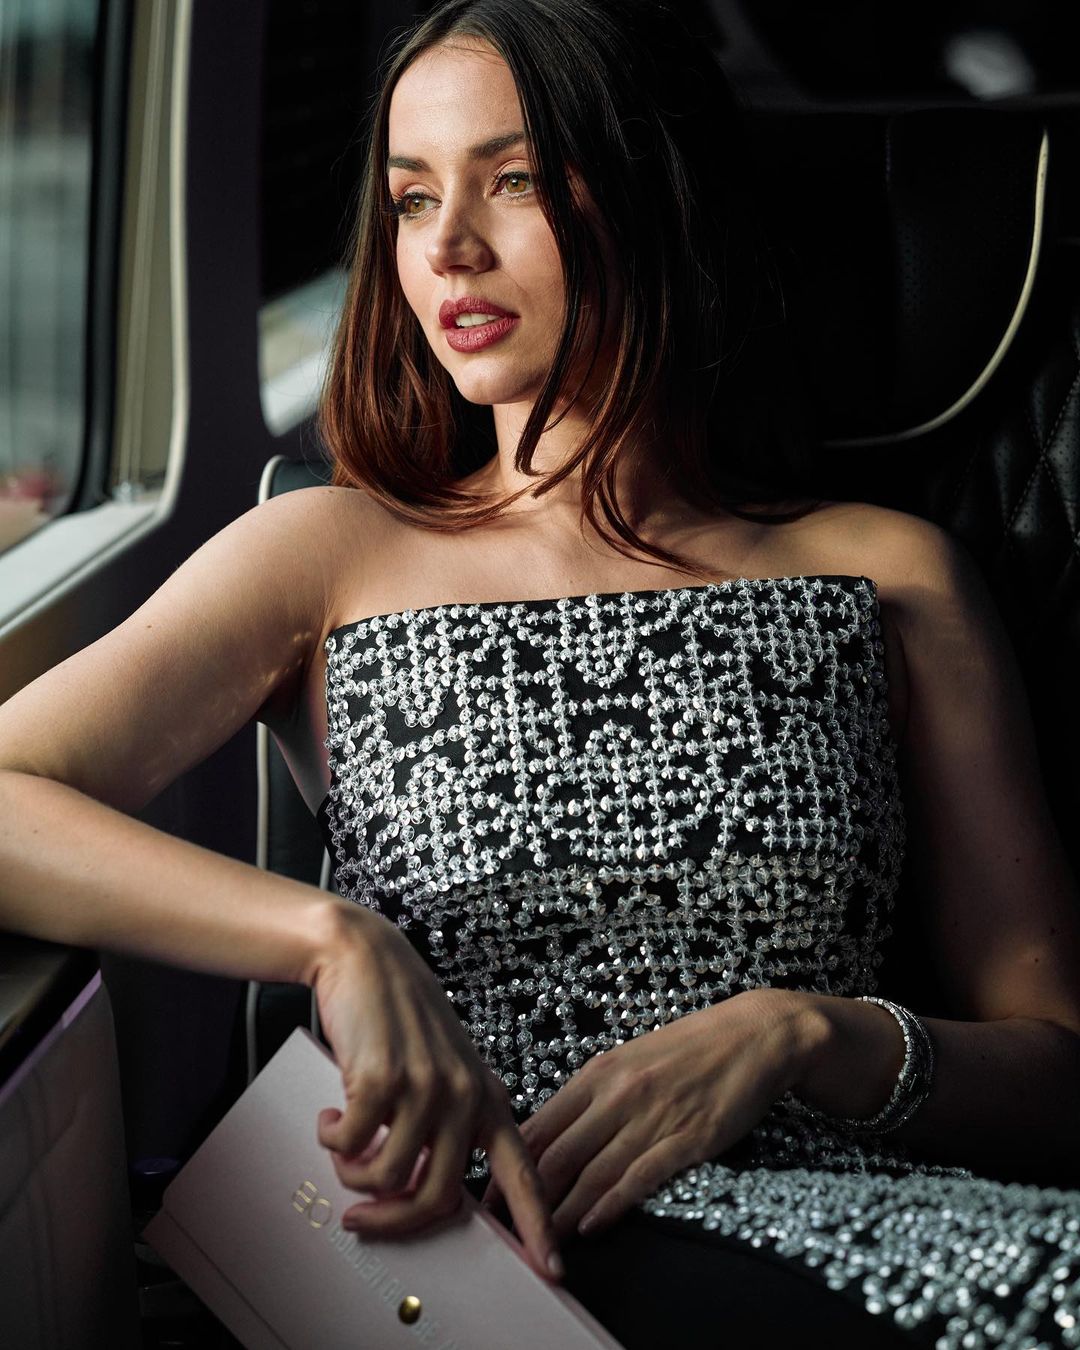 Ana De Armas On What She's Wearing, Her Oscar Nomination & Marilyn